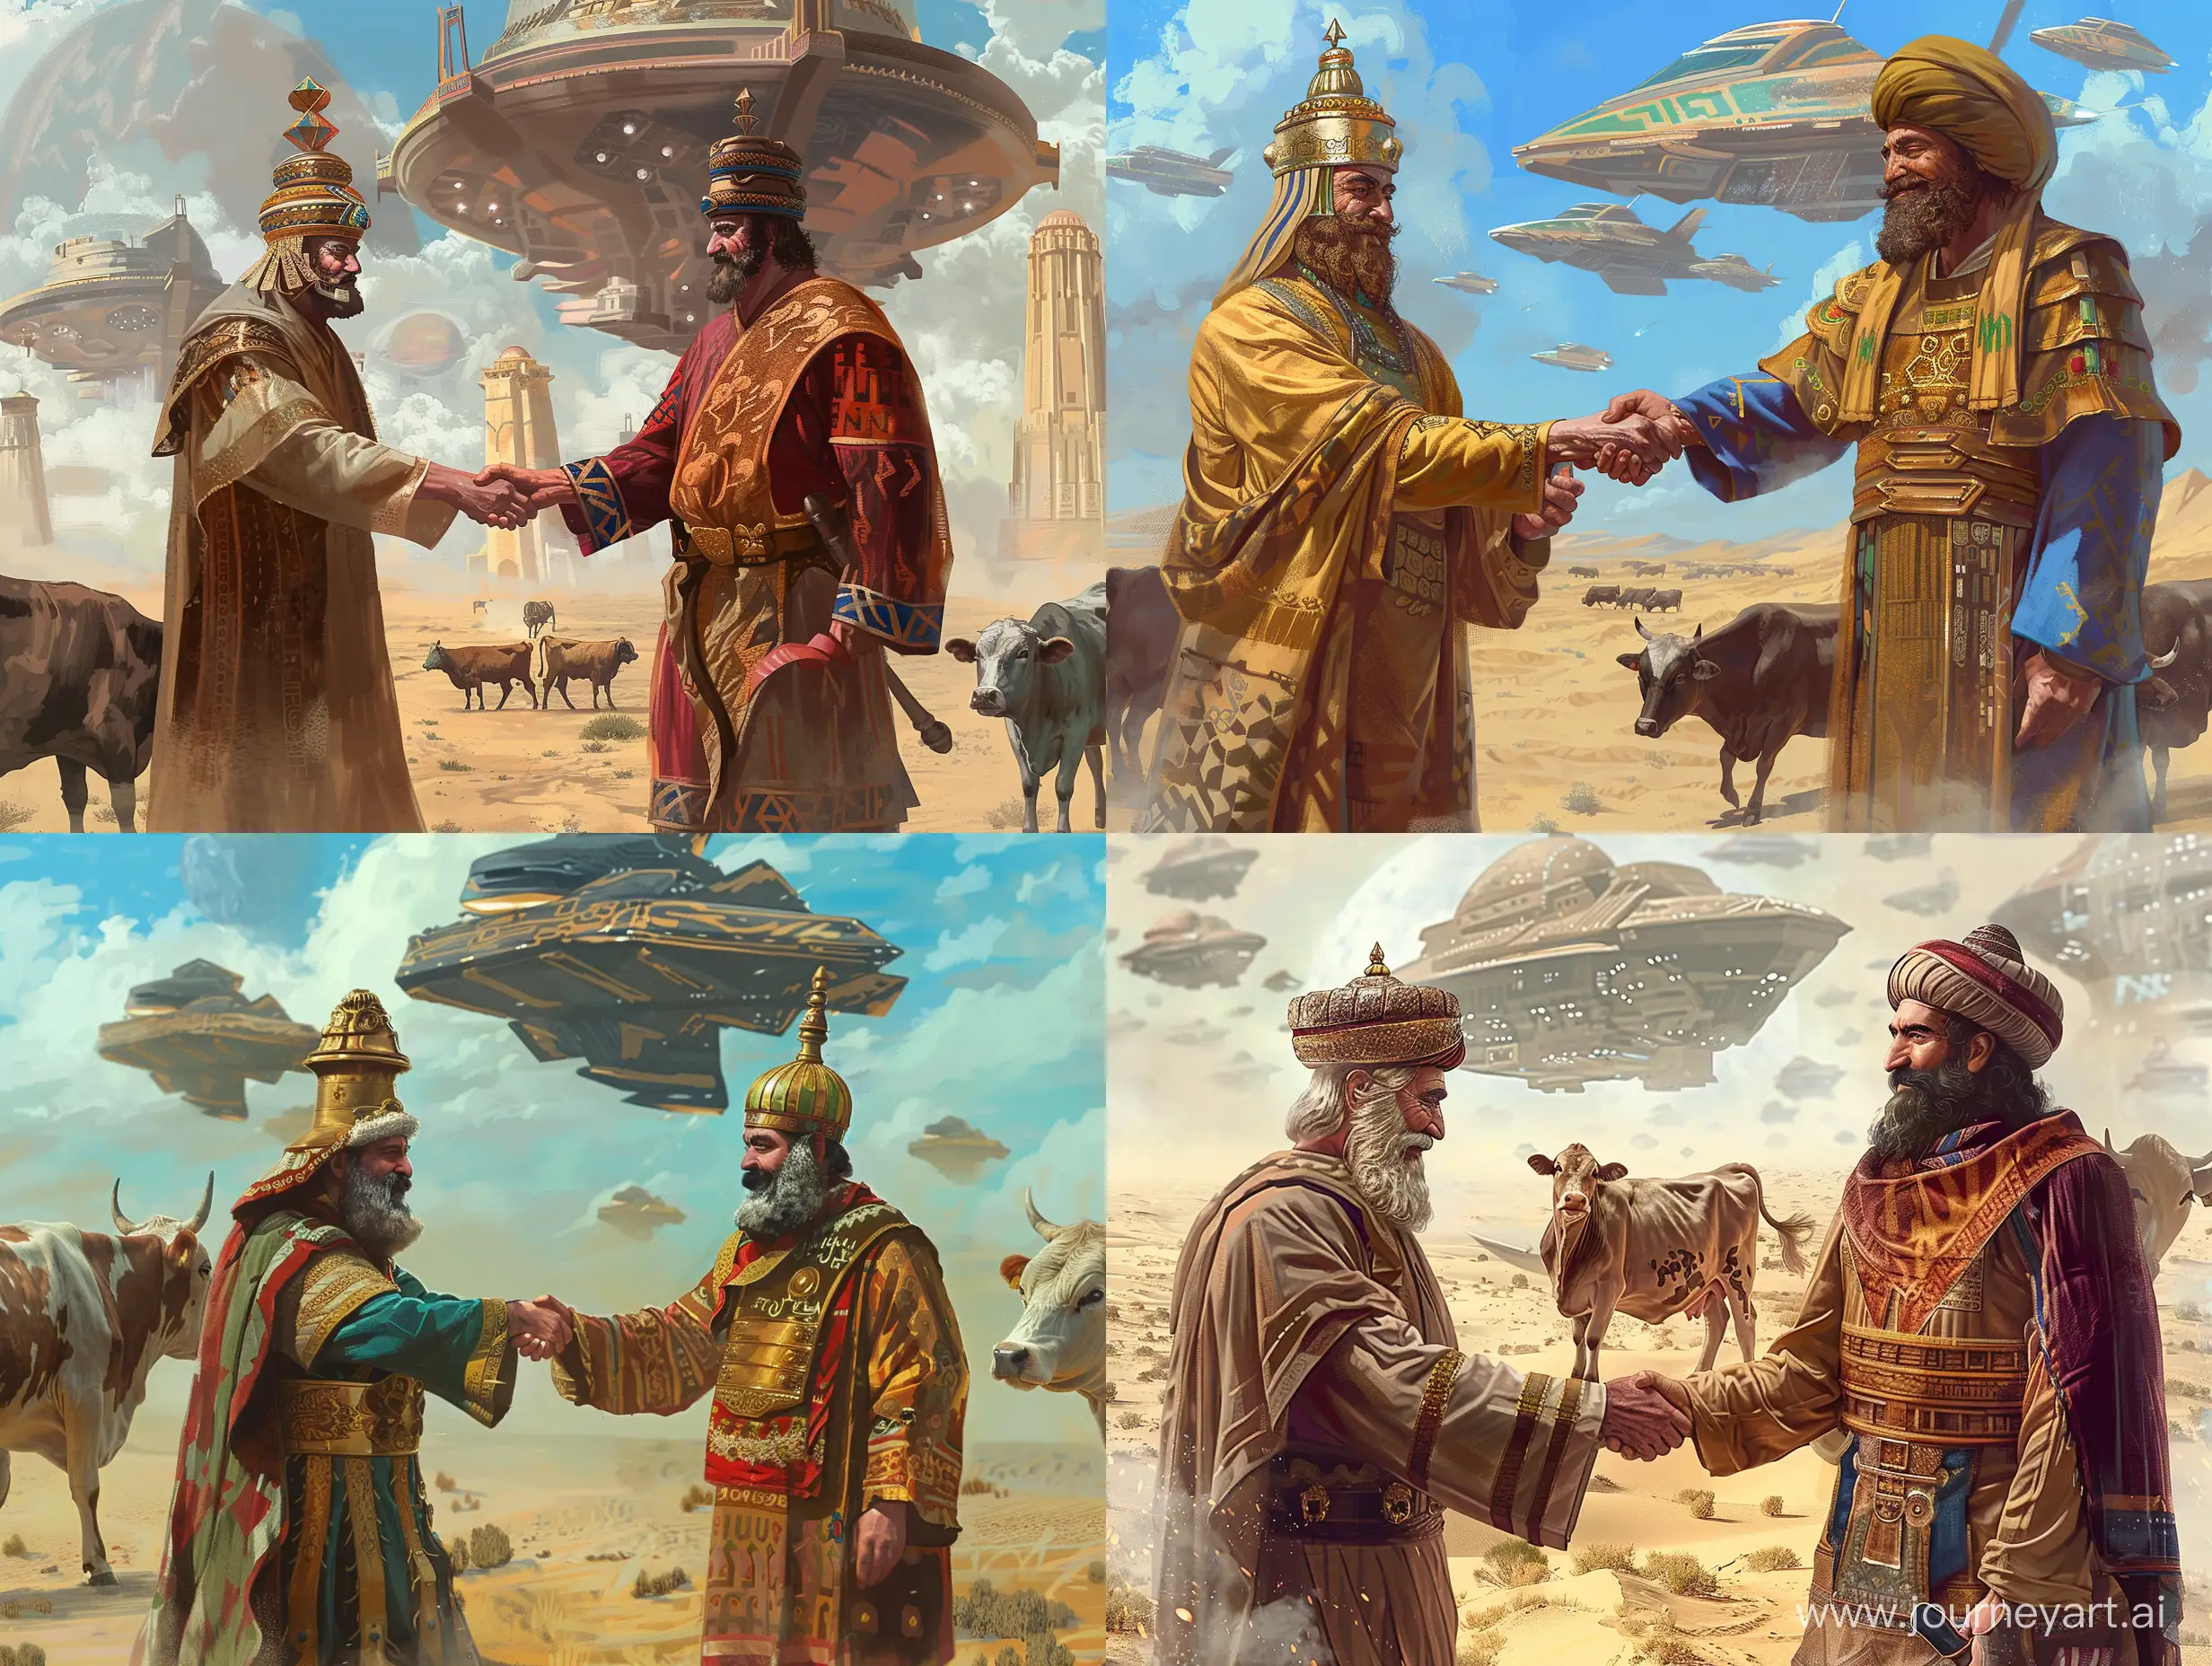 Historic-Encounter-Cyrus-the-Great-and-Nadir-Shah-Shake-Hands-in-Lut-Desert-Amidst-Surreal-Extraterrestrial-Activity